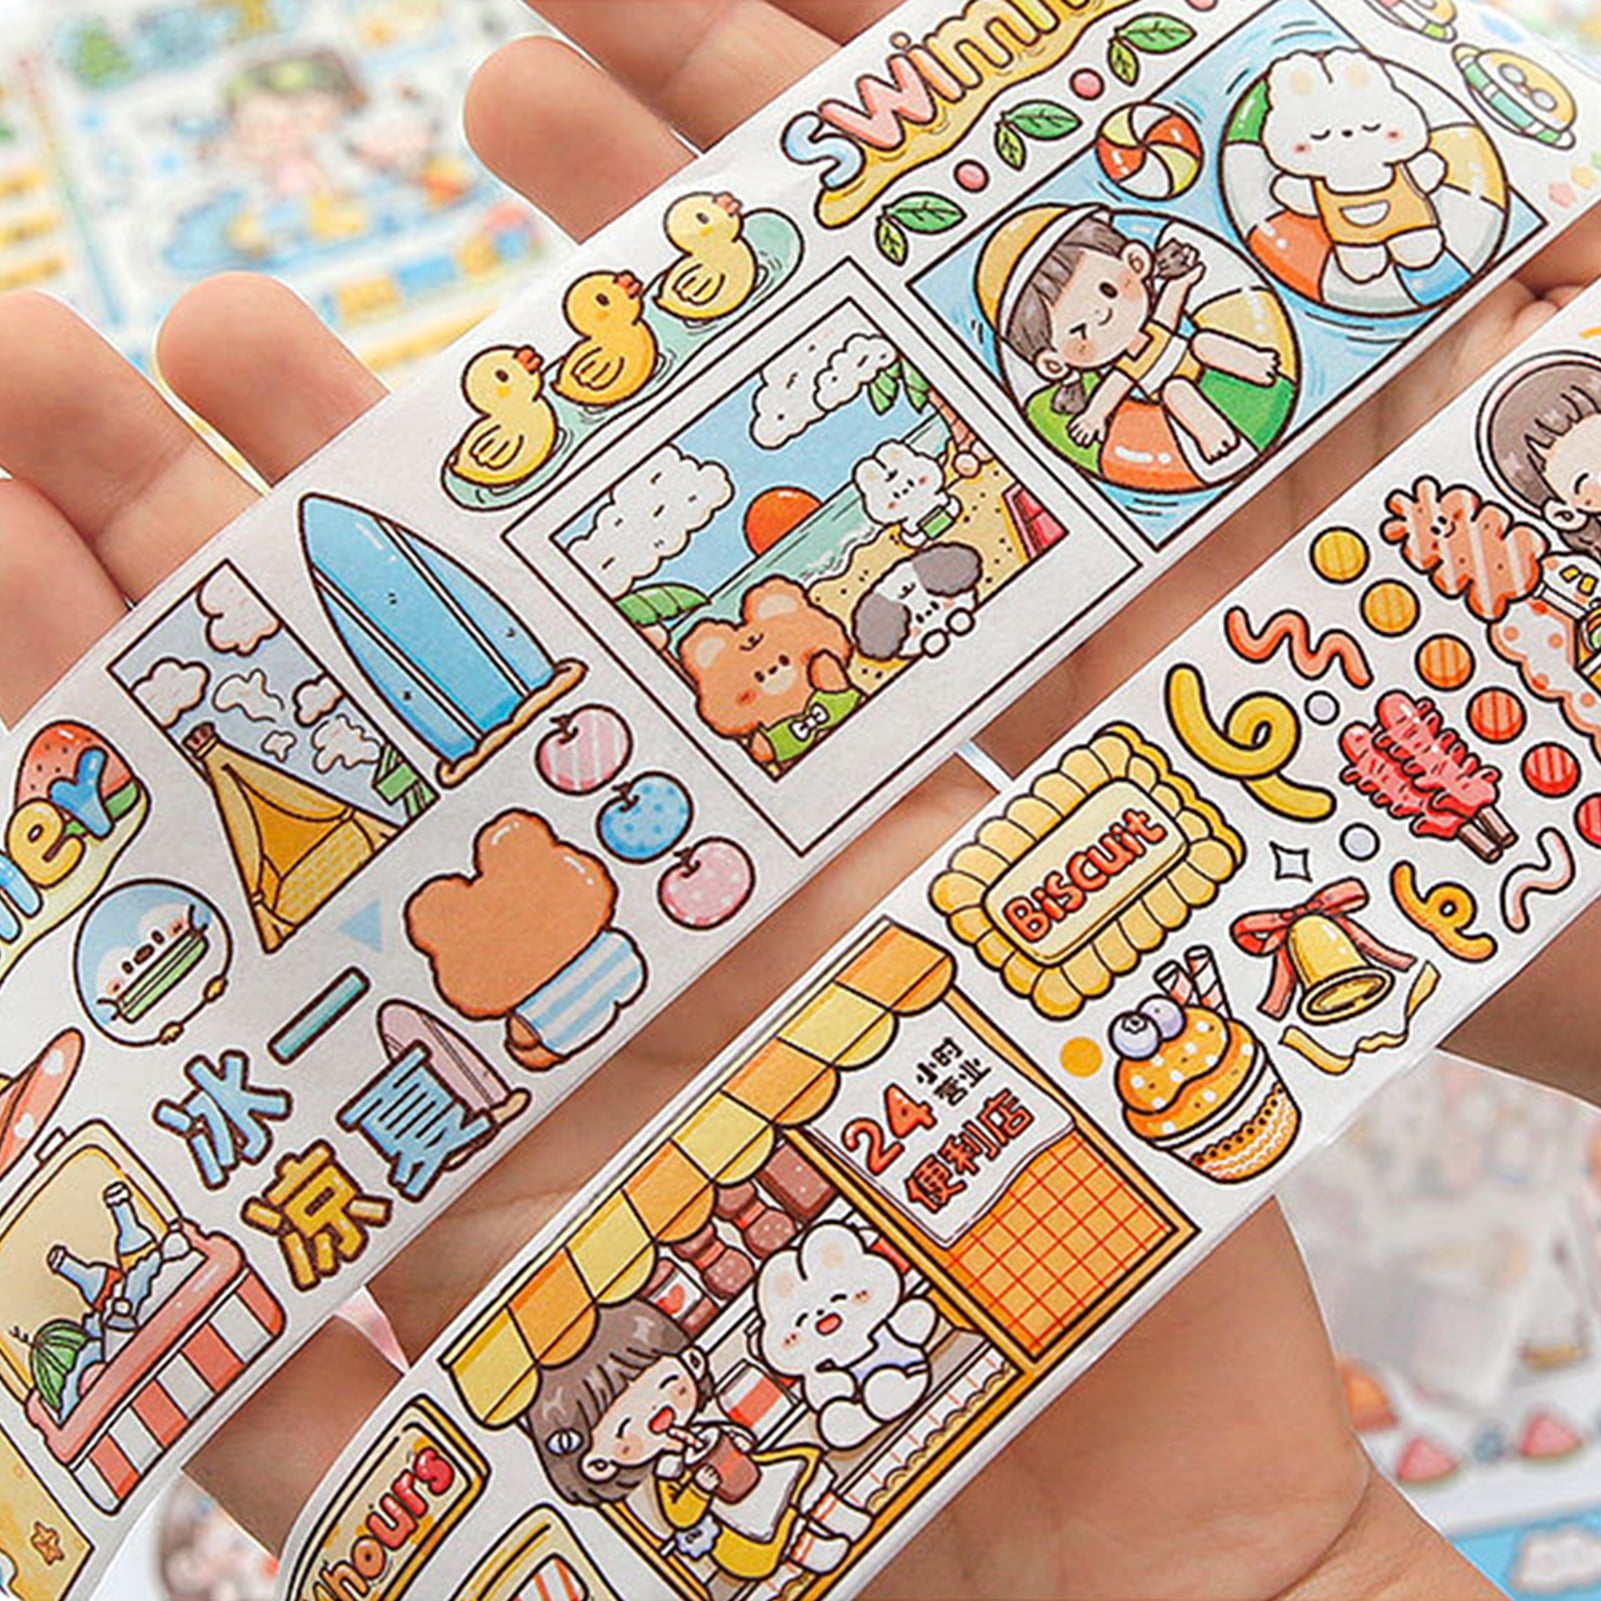 Kripyery 1 Roll Stationery Stickers Washi Paper Adhesive Tape Cute